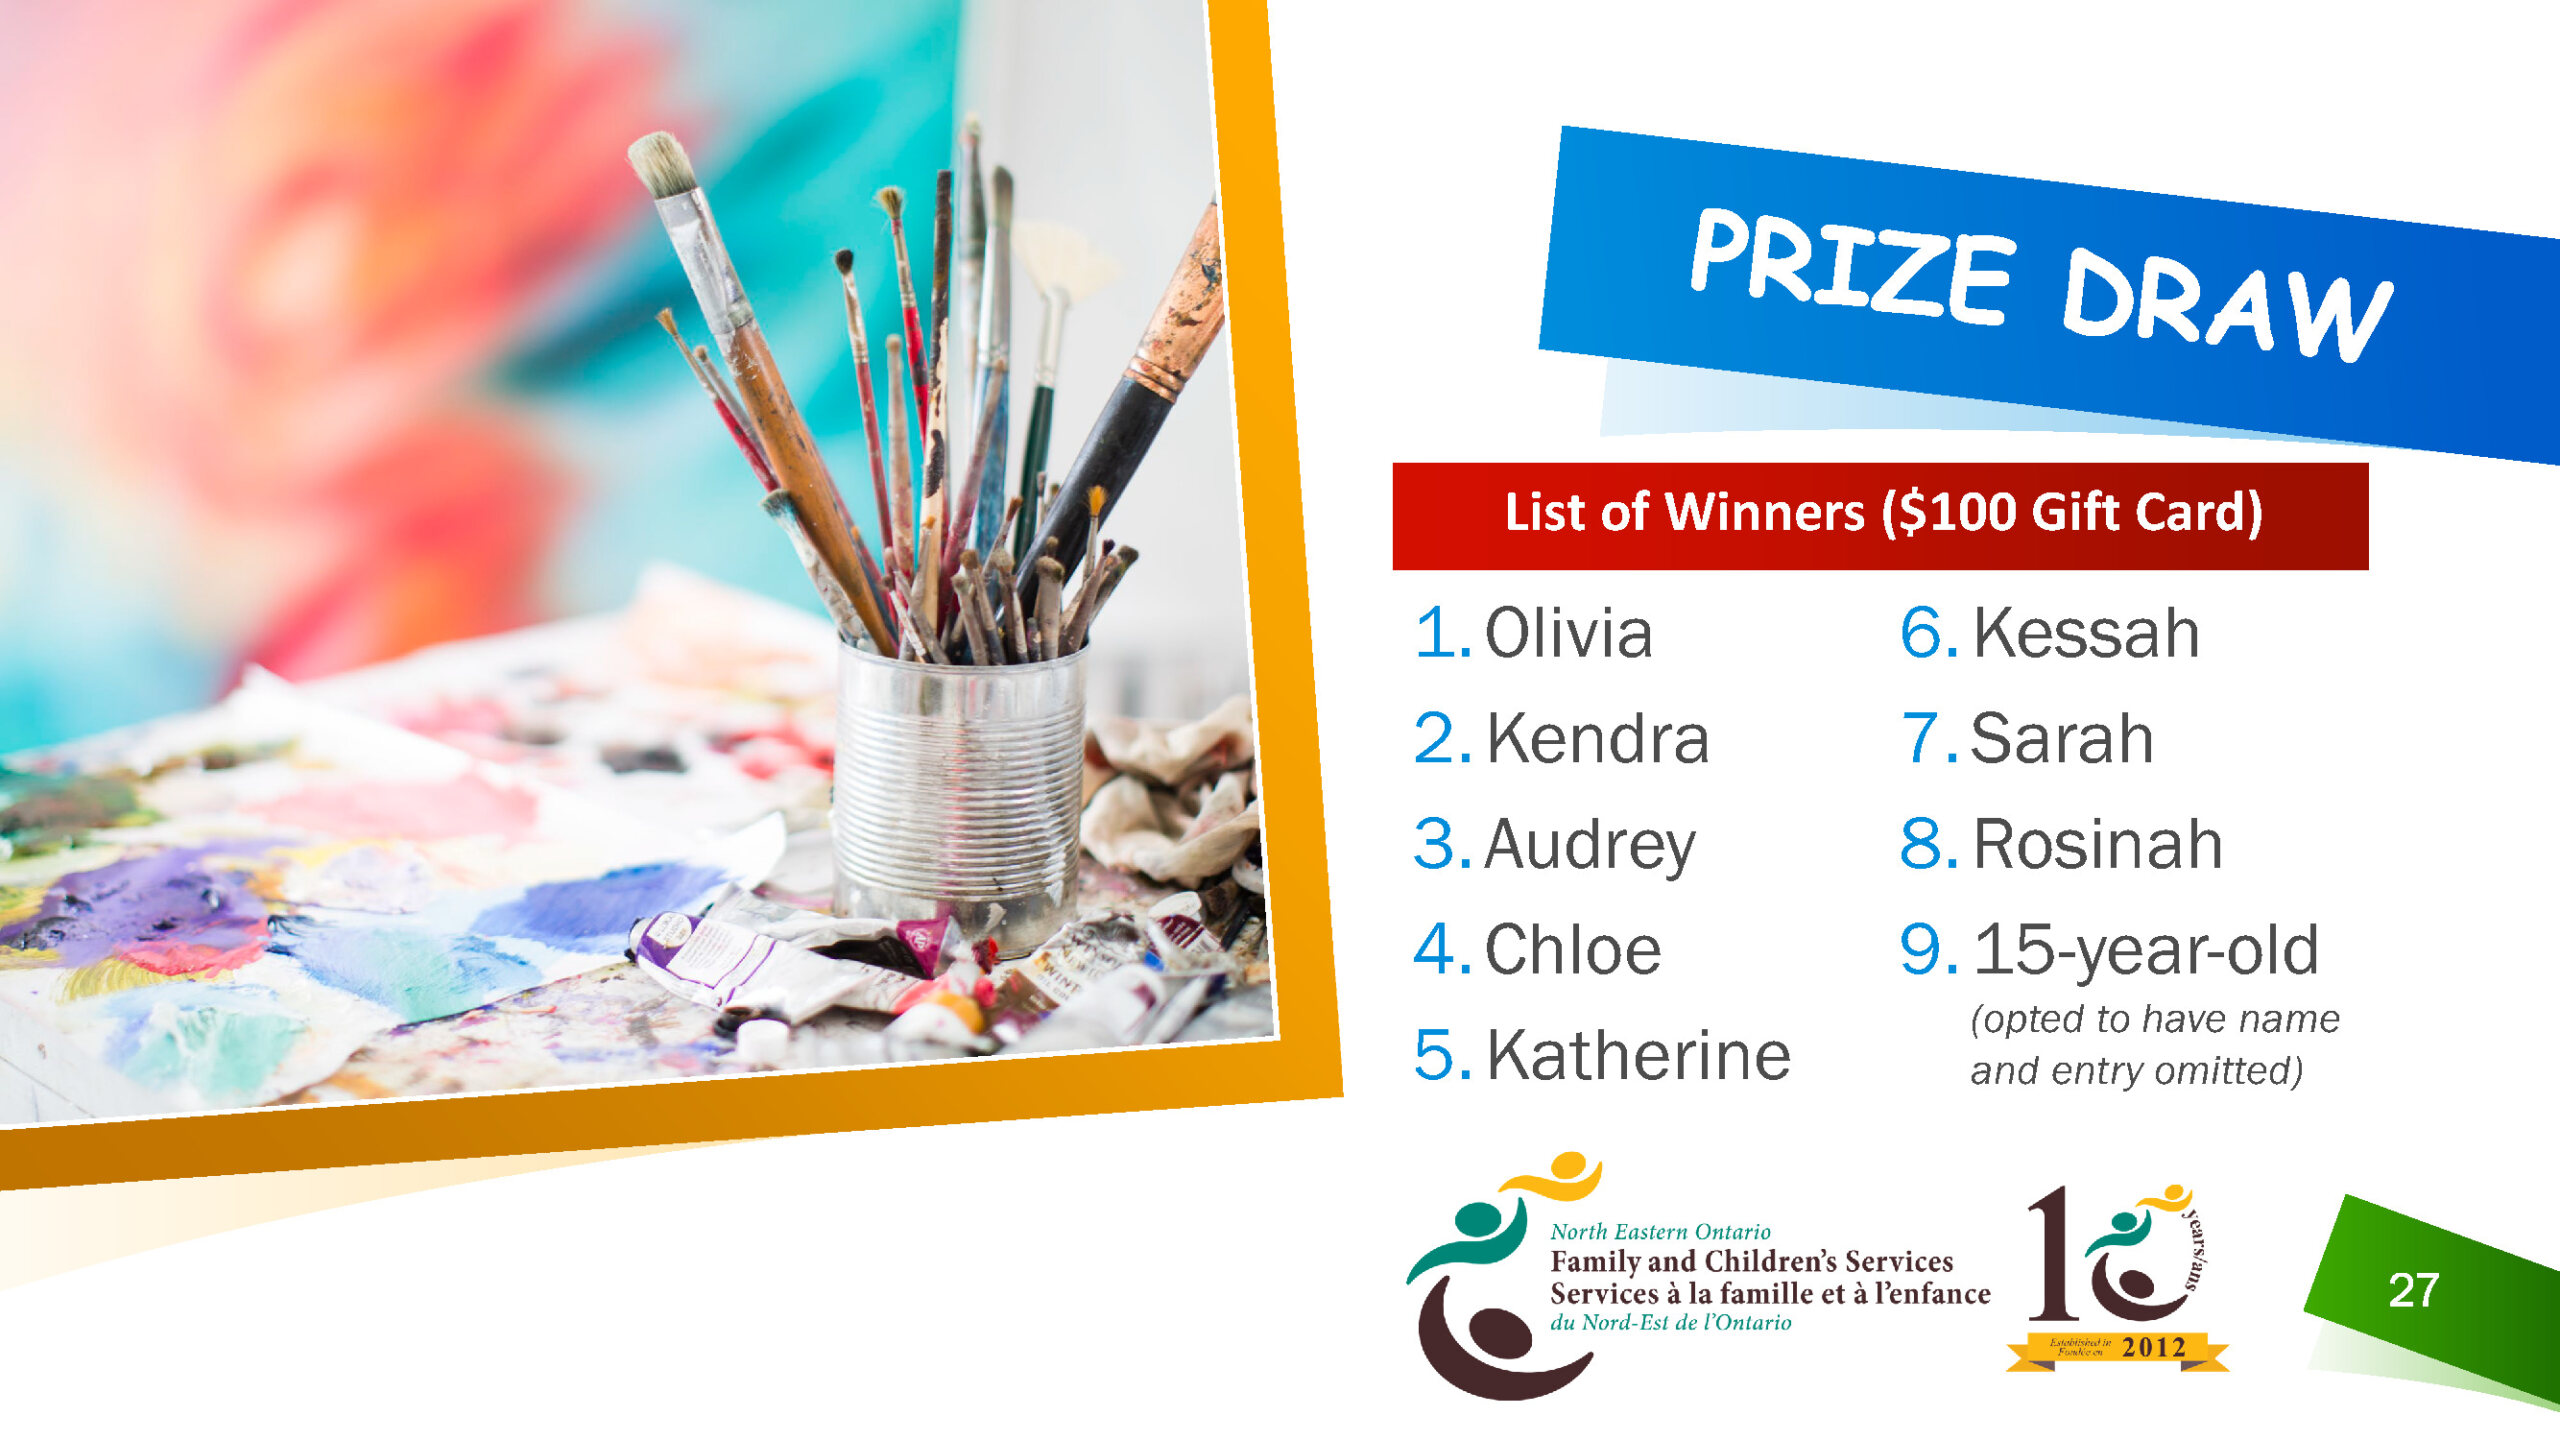 List of winners of the prize draw